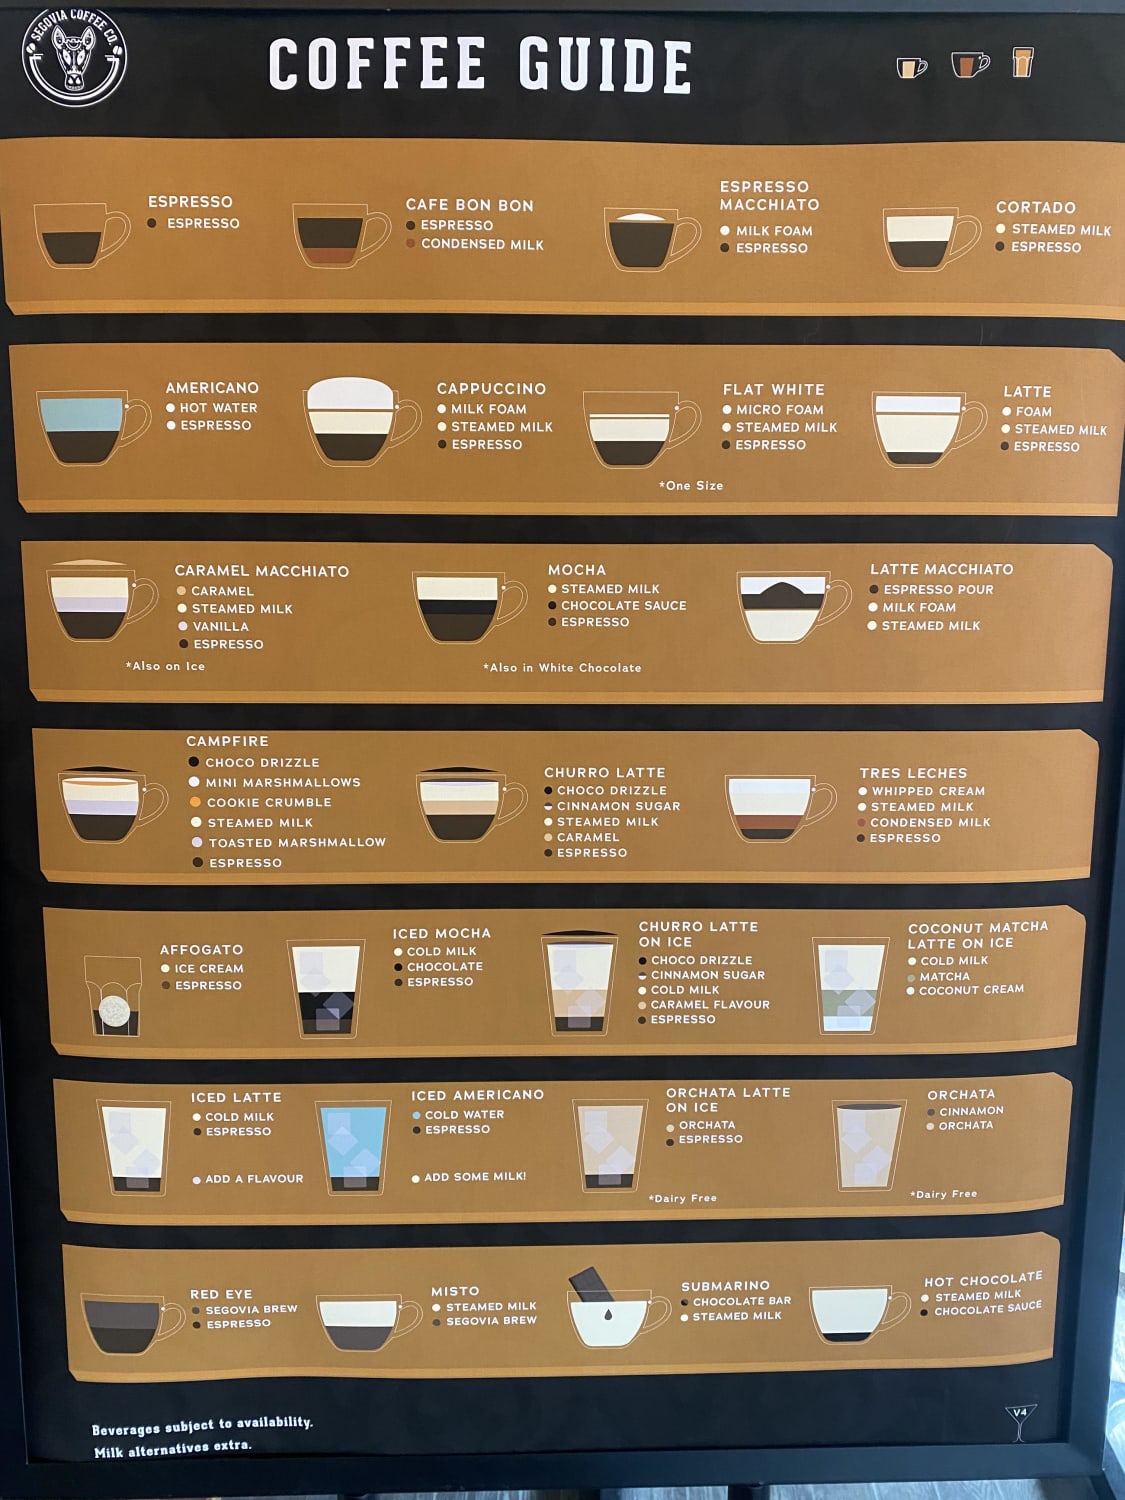 I love the coffee guide at my local coffee shop!